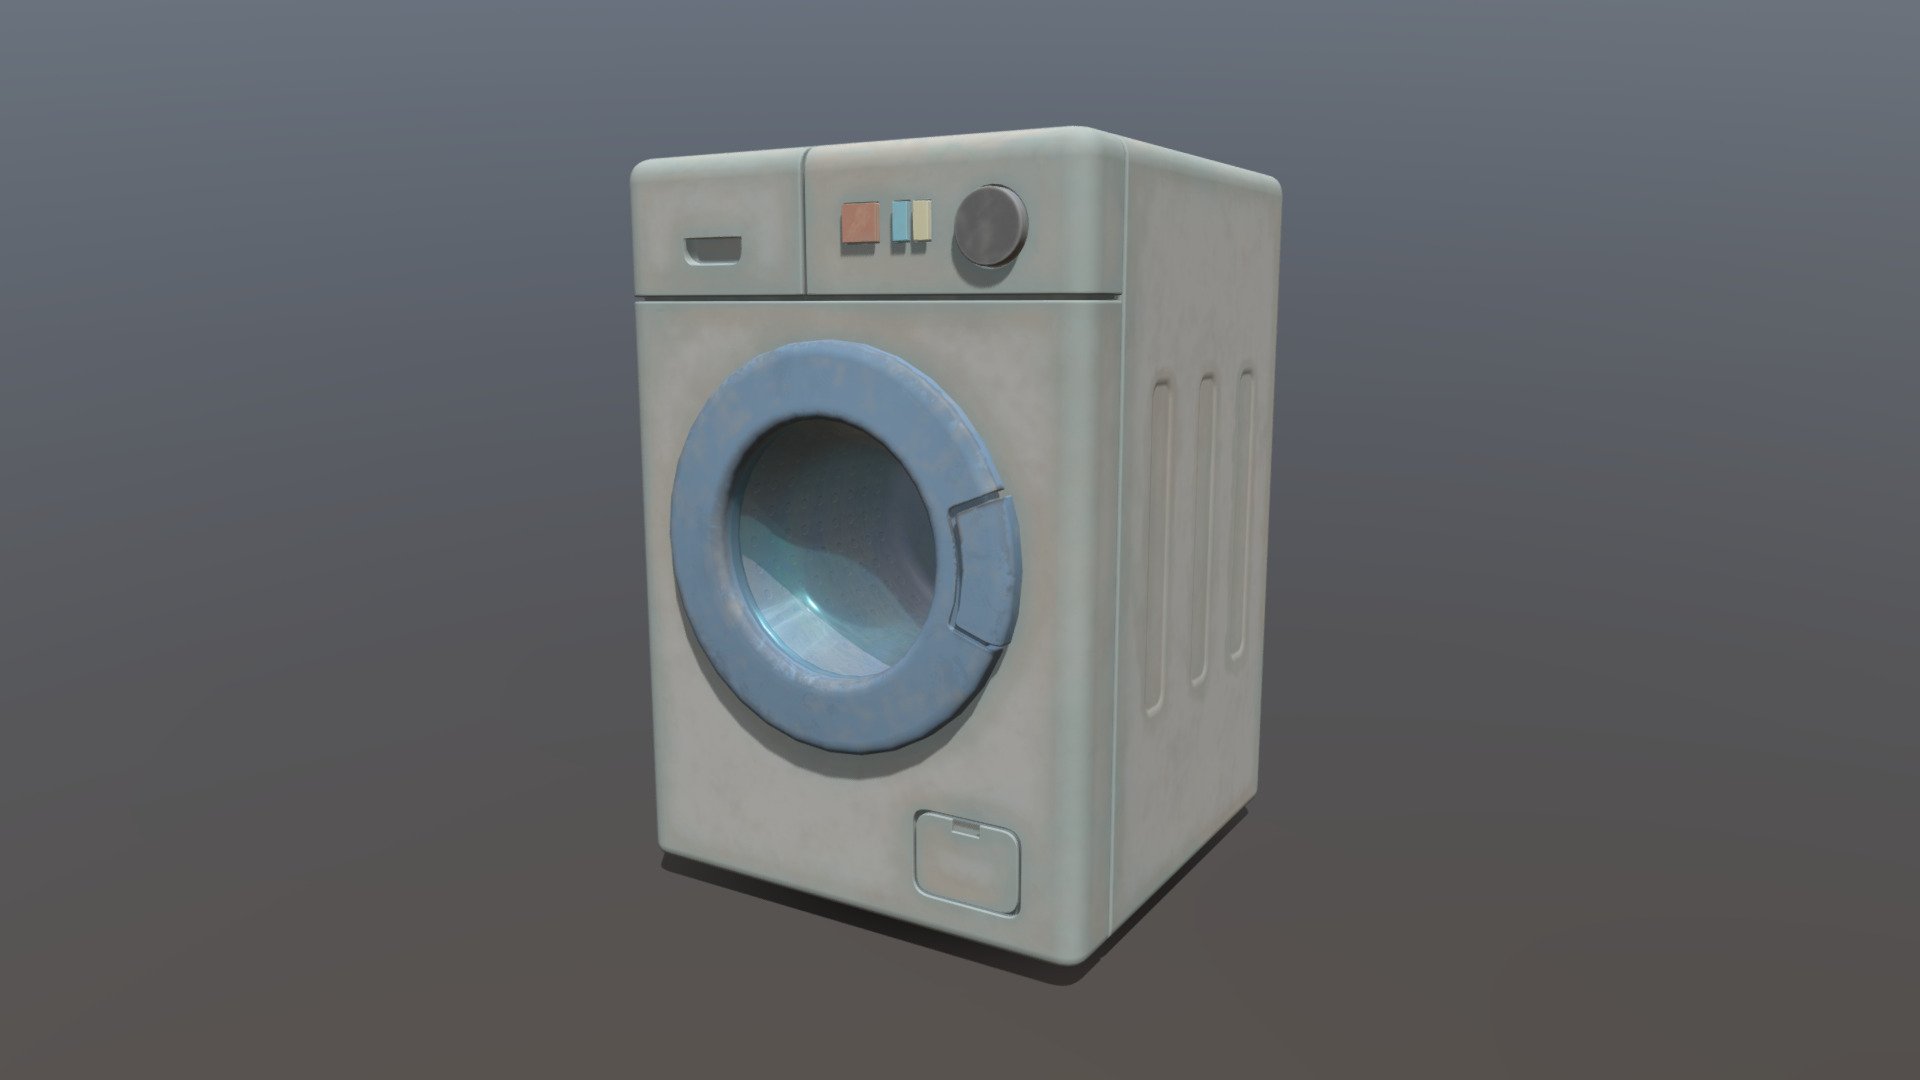 Stylized Cartoony Washing machine model made in 3ds Max 2022 and textured in Substance Painter. Model has 6570 polygons and 6360 vertices. Nothing is rigged/animated, the door isn't supposed to open. Textures come in 4k reso.

As usual: best wishes and have a great day!:) - Stylized Cartoony Washing Machine - 3D model by Art-Teeves 3d model